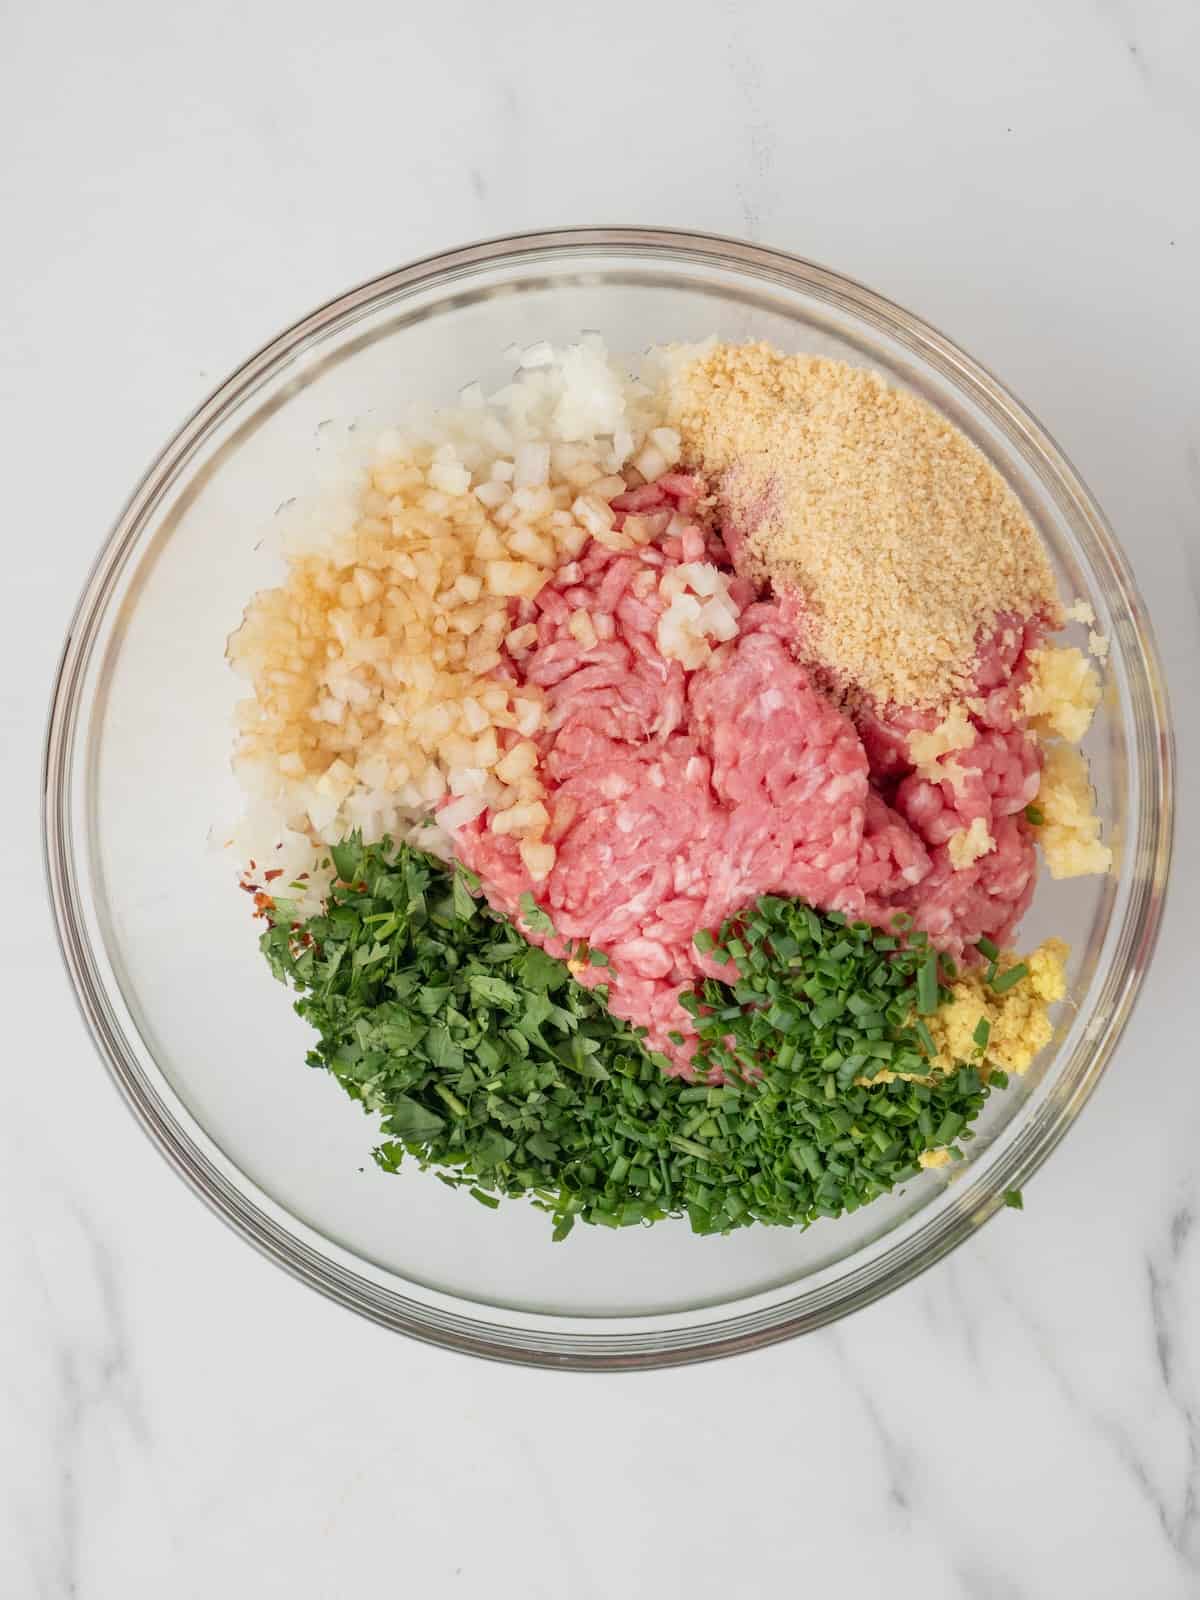 A large glass mixing bowl with ground pork, seasonings and finely chopped ginger, garlic and onion, seasonings and bread crumbs to make asian pork meatballs.